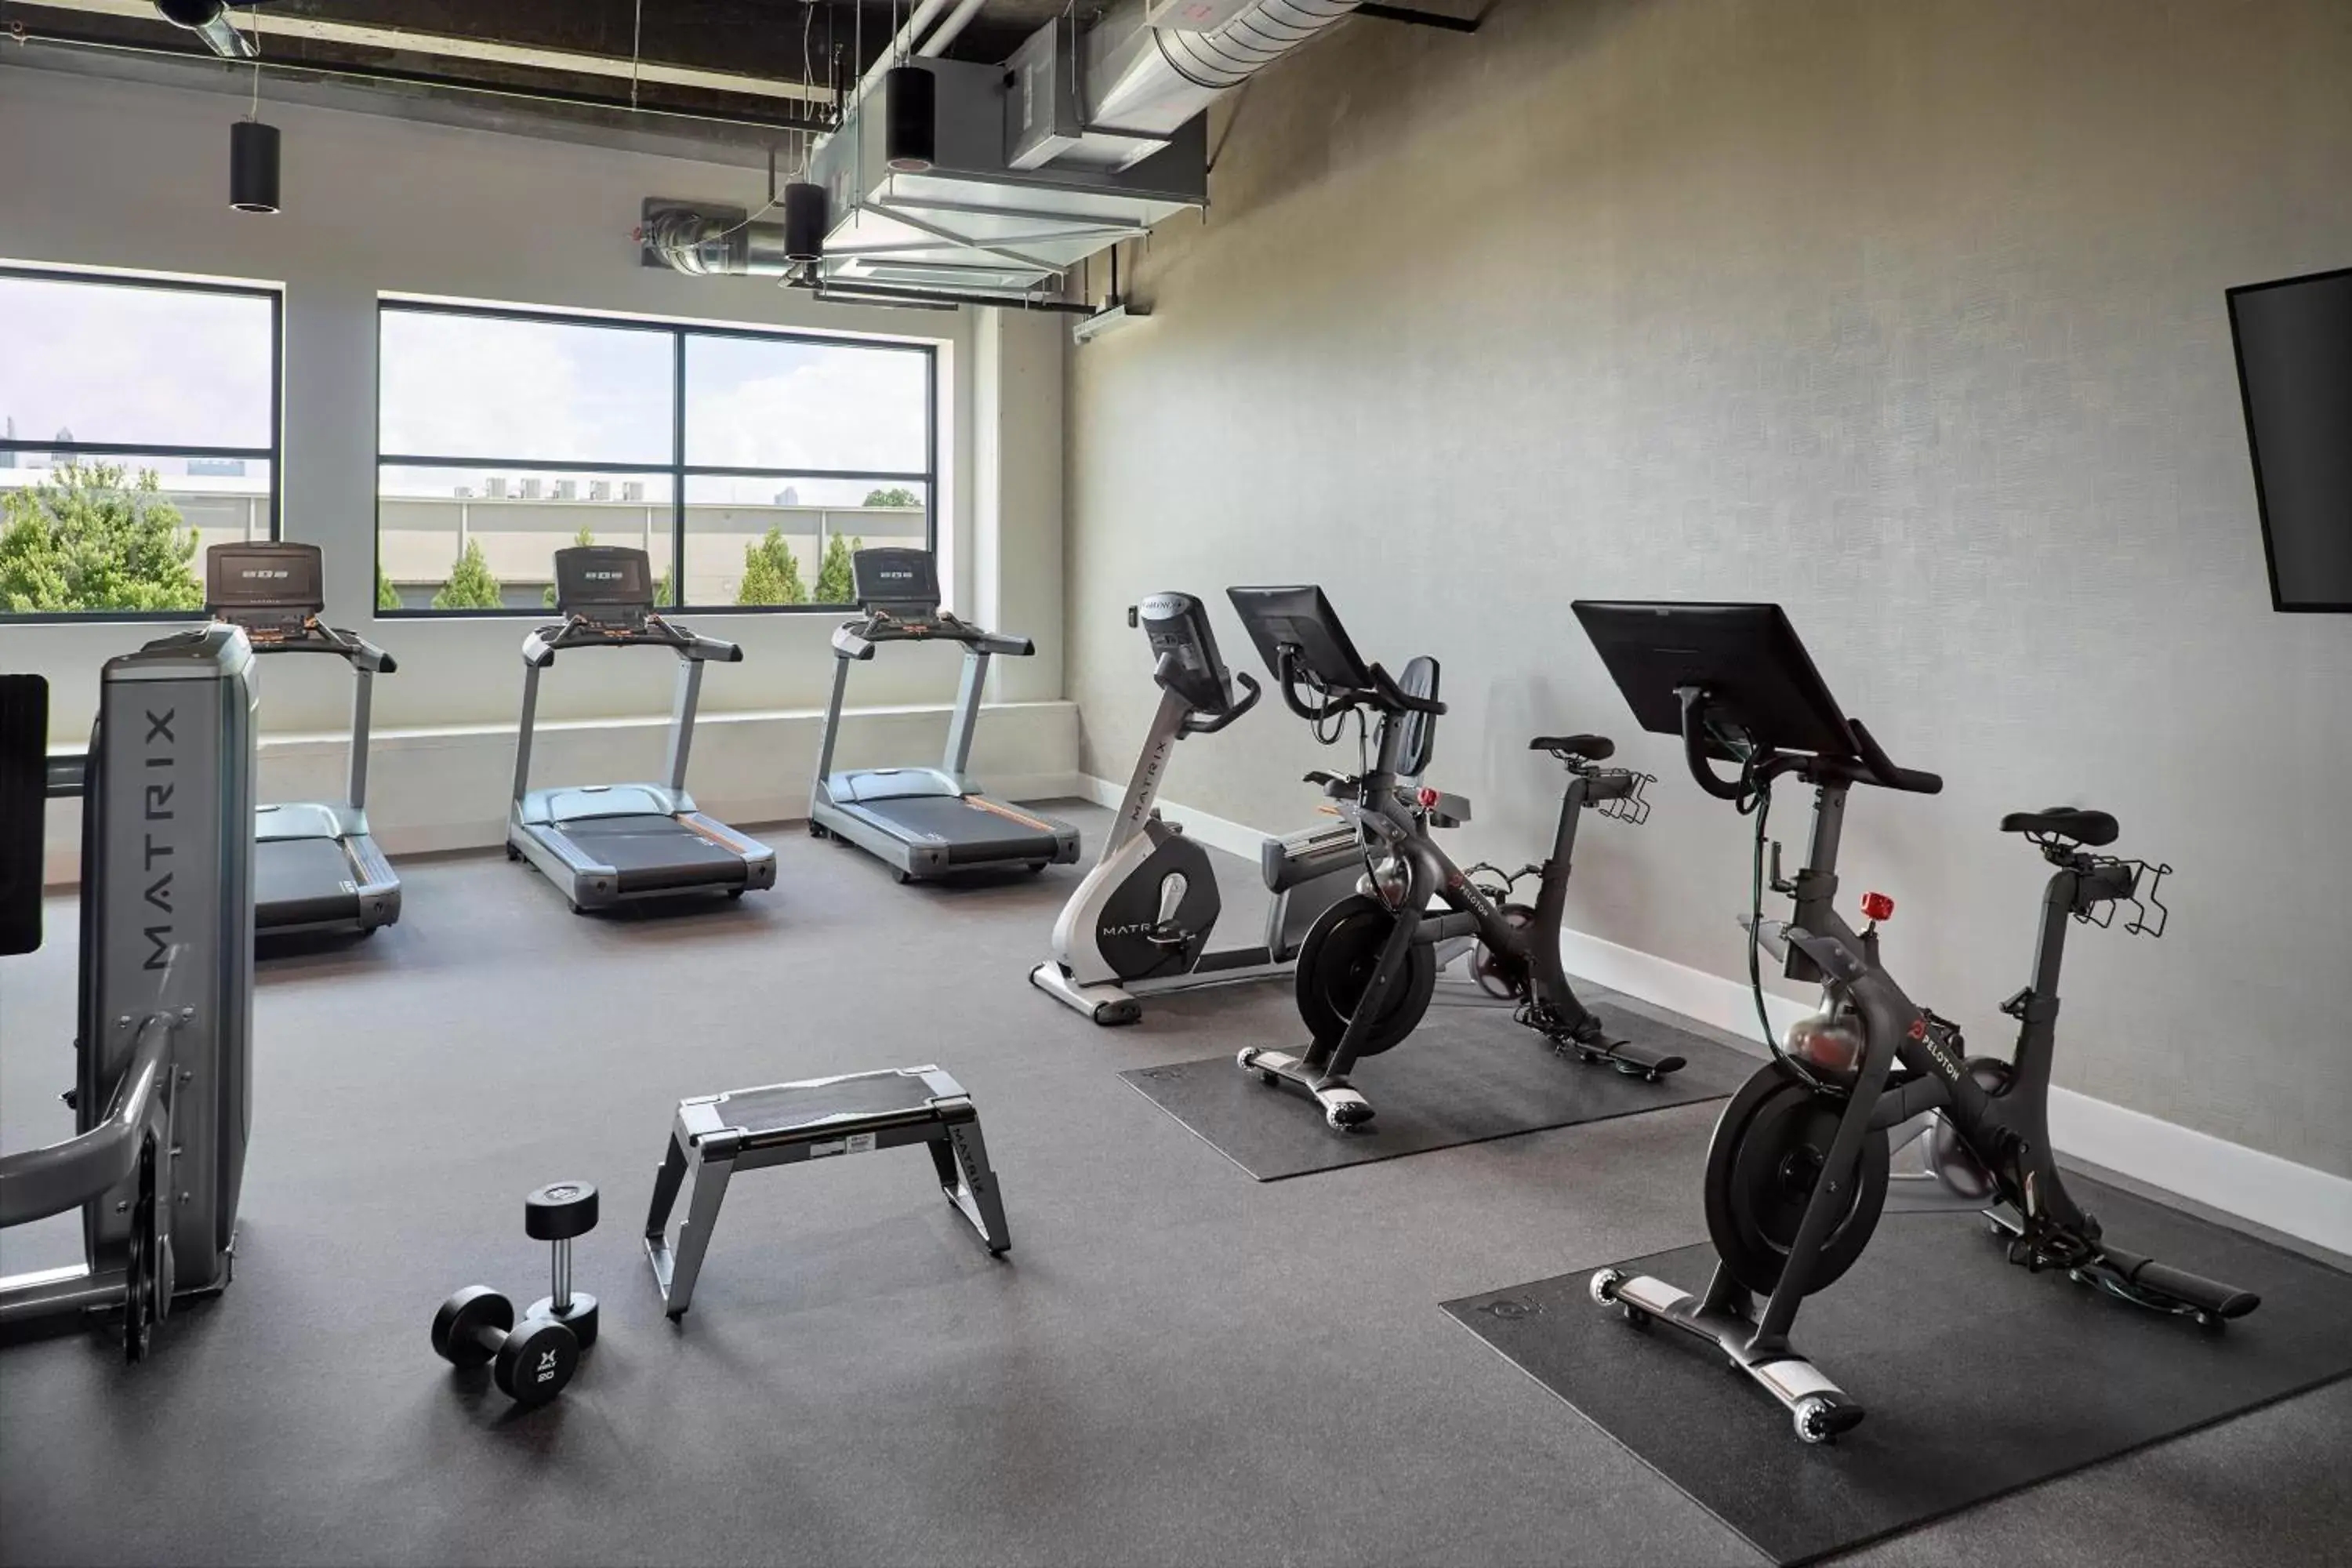 Fitness centre/facilities, Fitness Center/Facilities in Bellyard, West Midtown Atlanta, a Tribute Portfolio Hotel